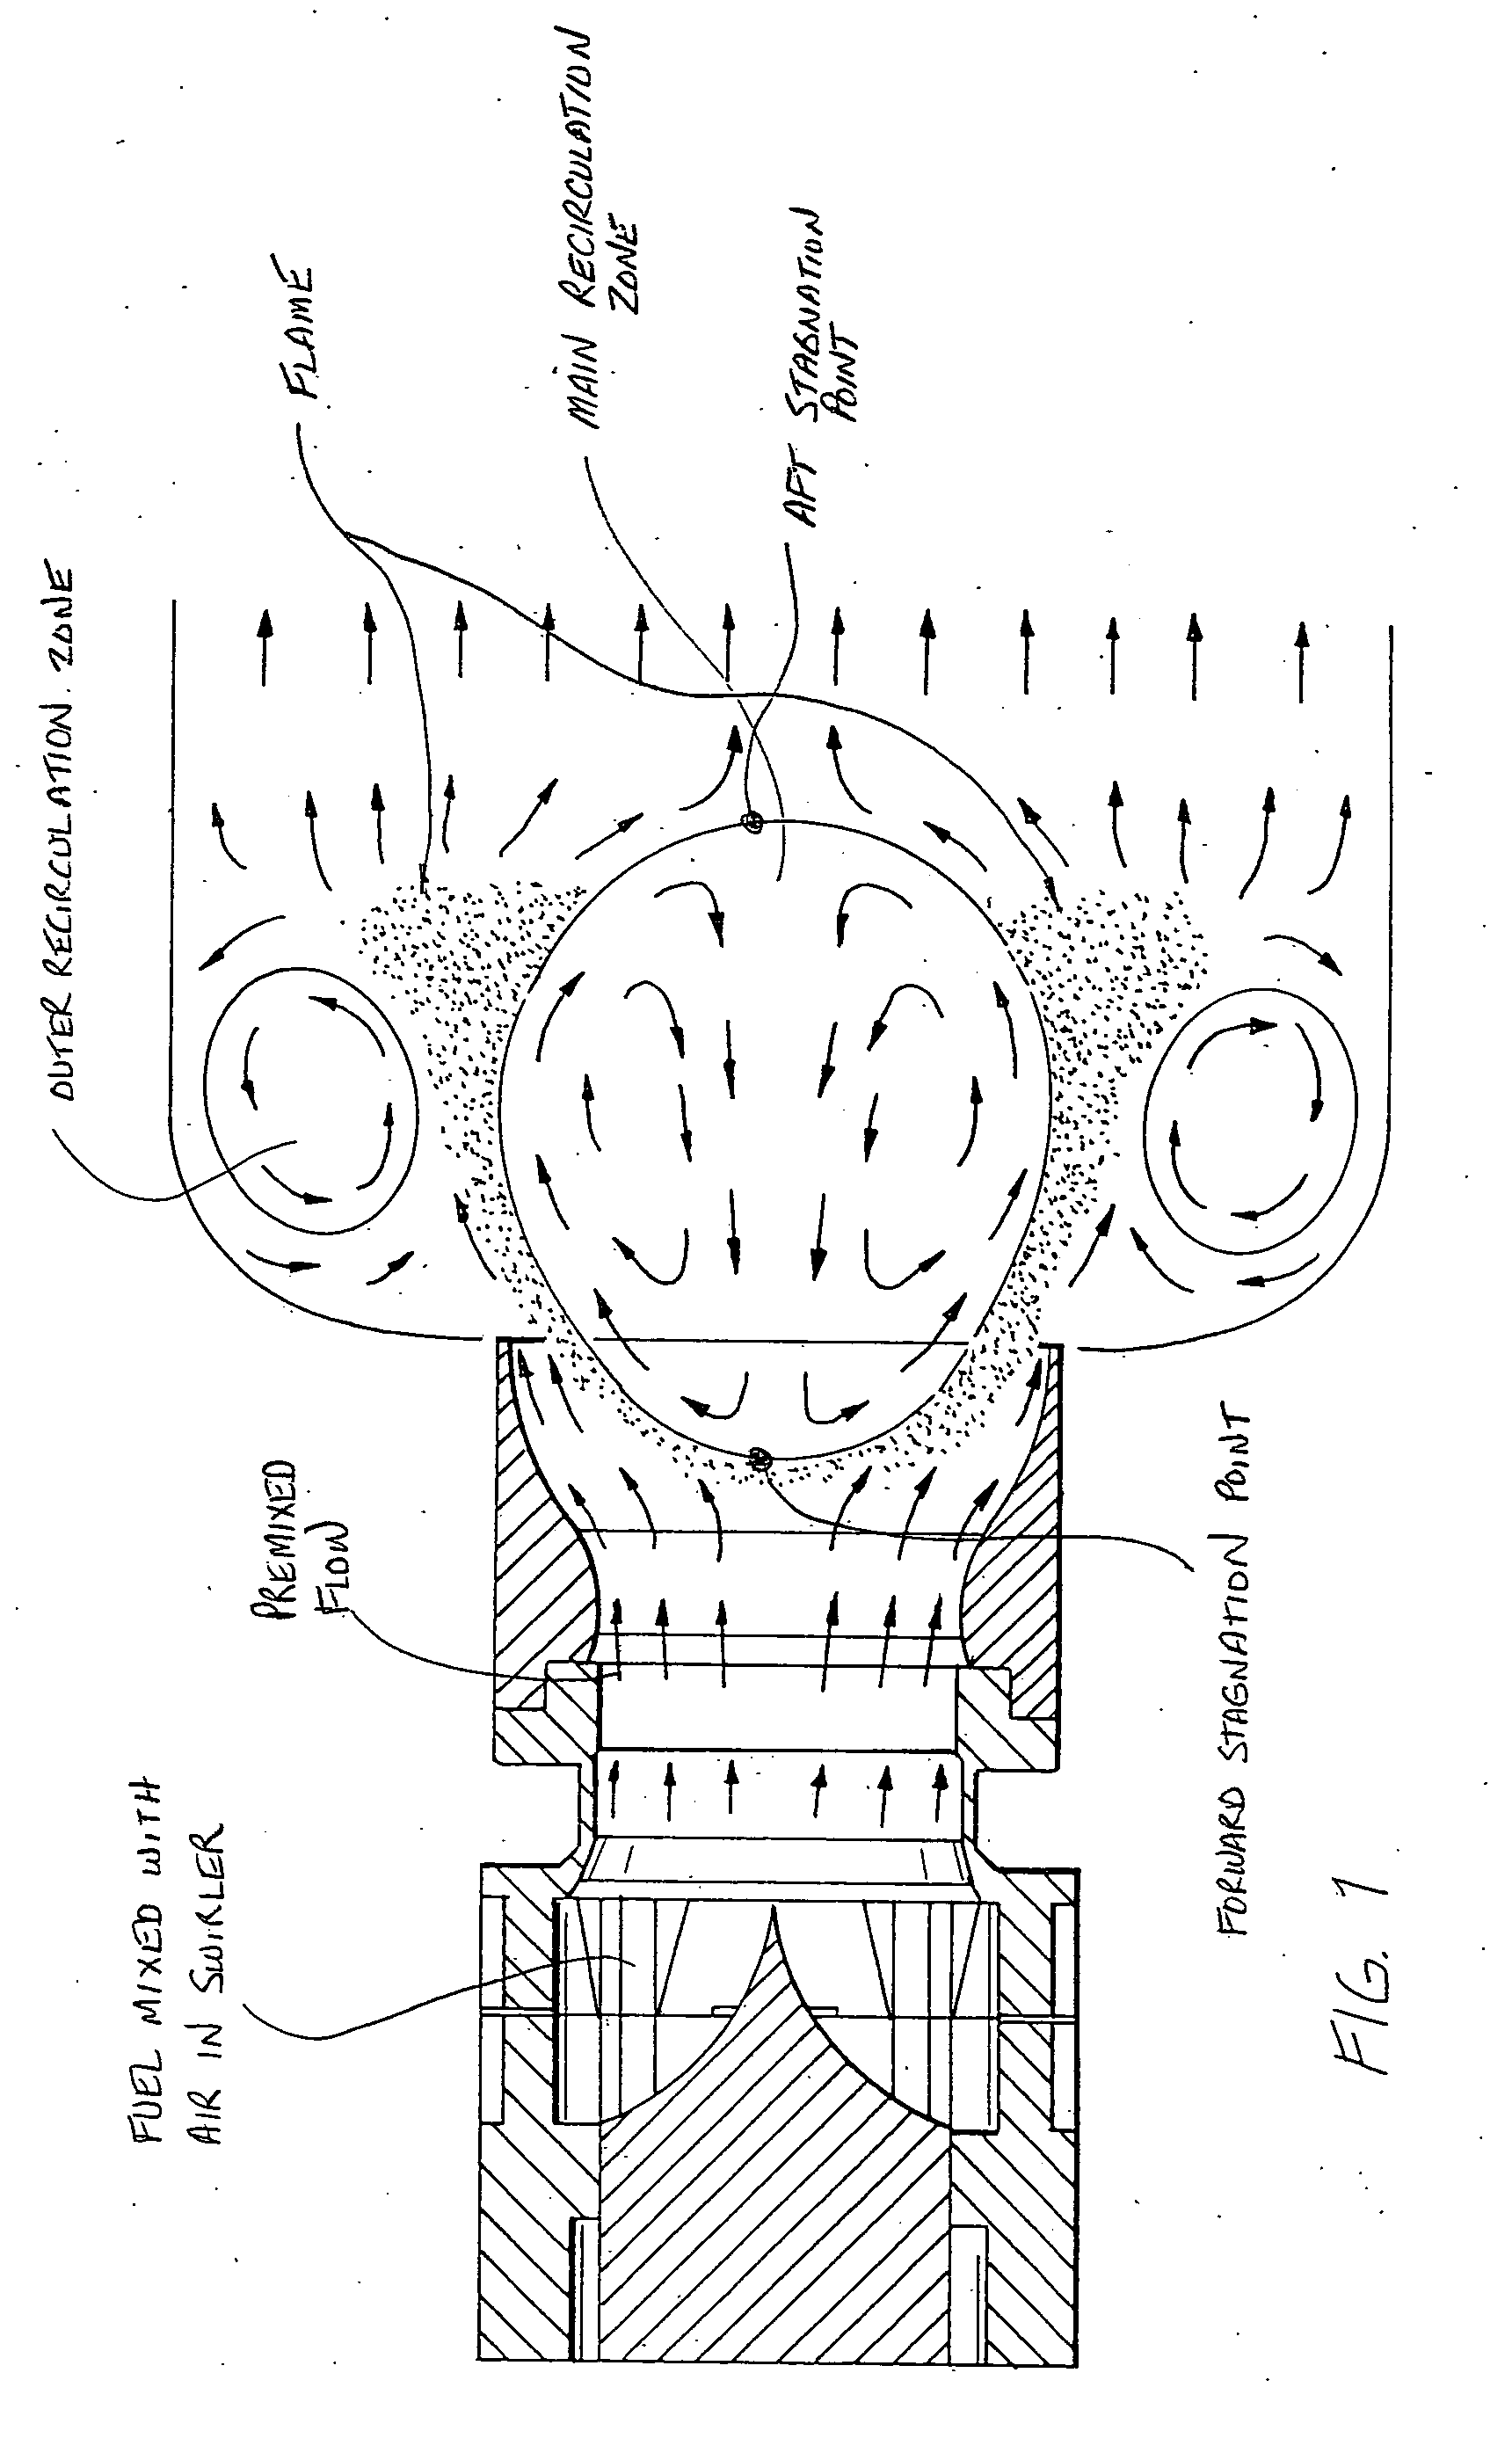 Device for stabilizing combustion in gas turbine engines